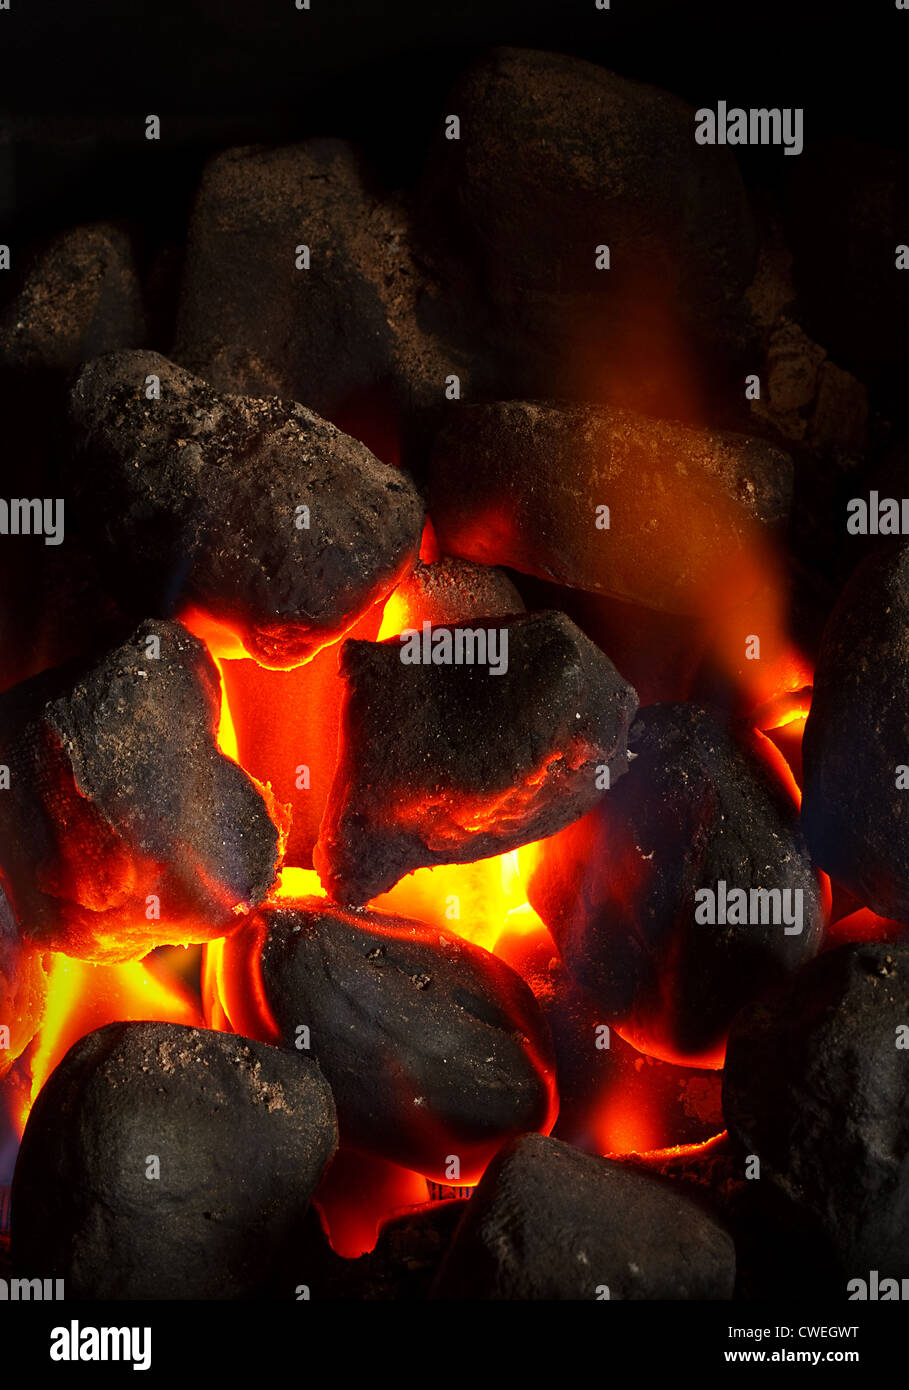 Close up of an imitation solid fuel fire powered by mains gas supply Stock Photo